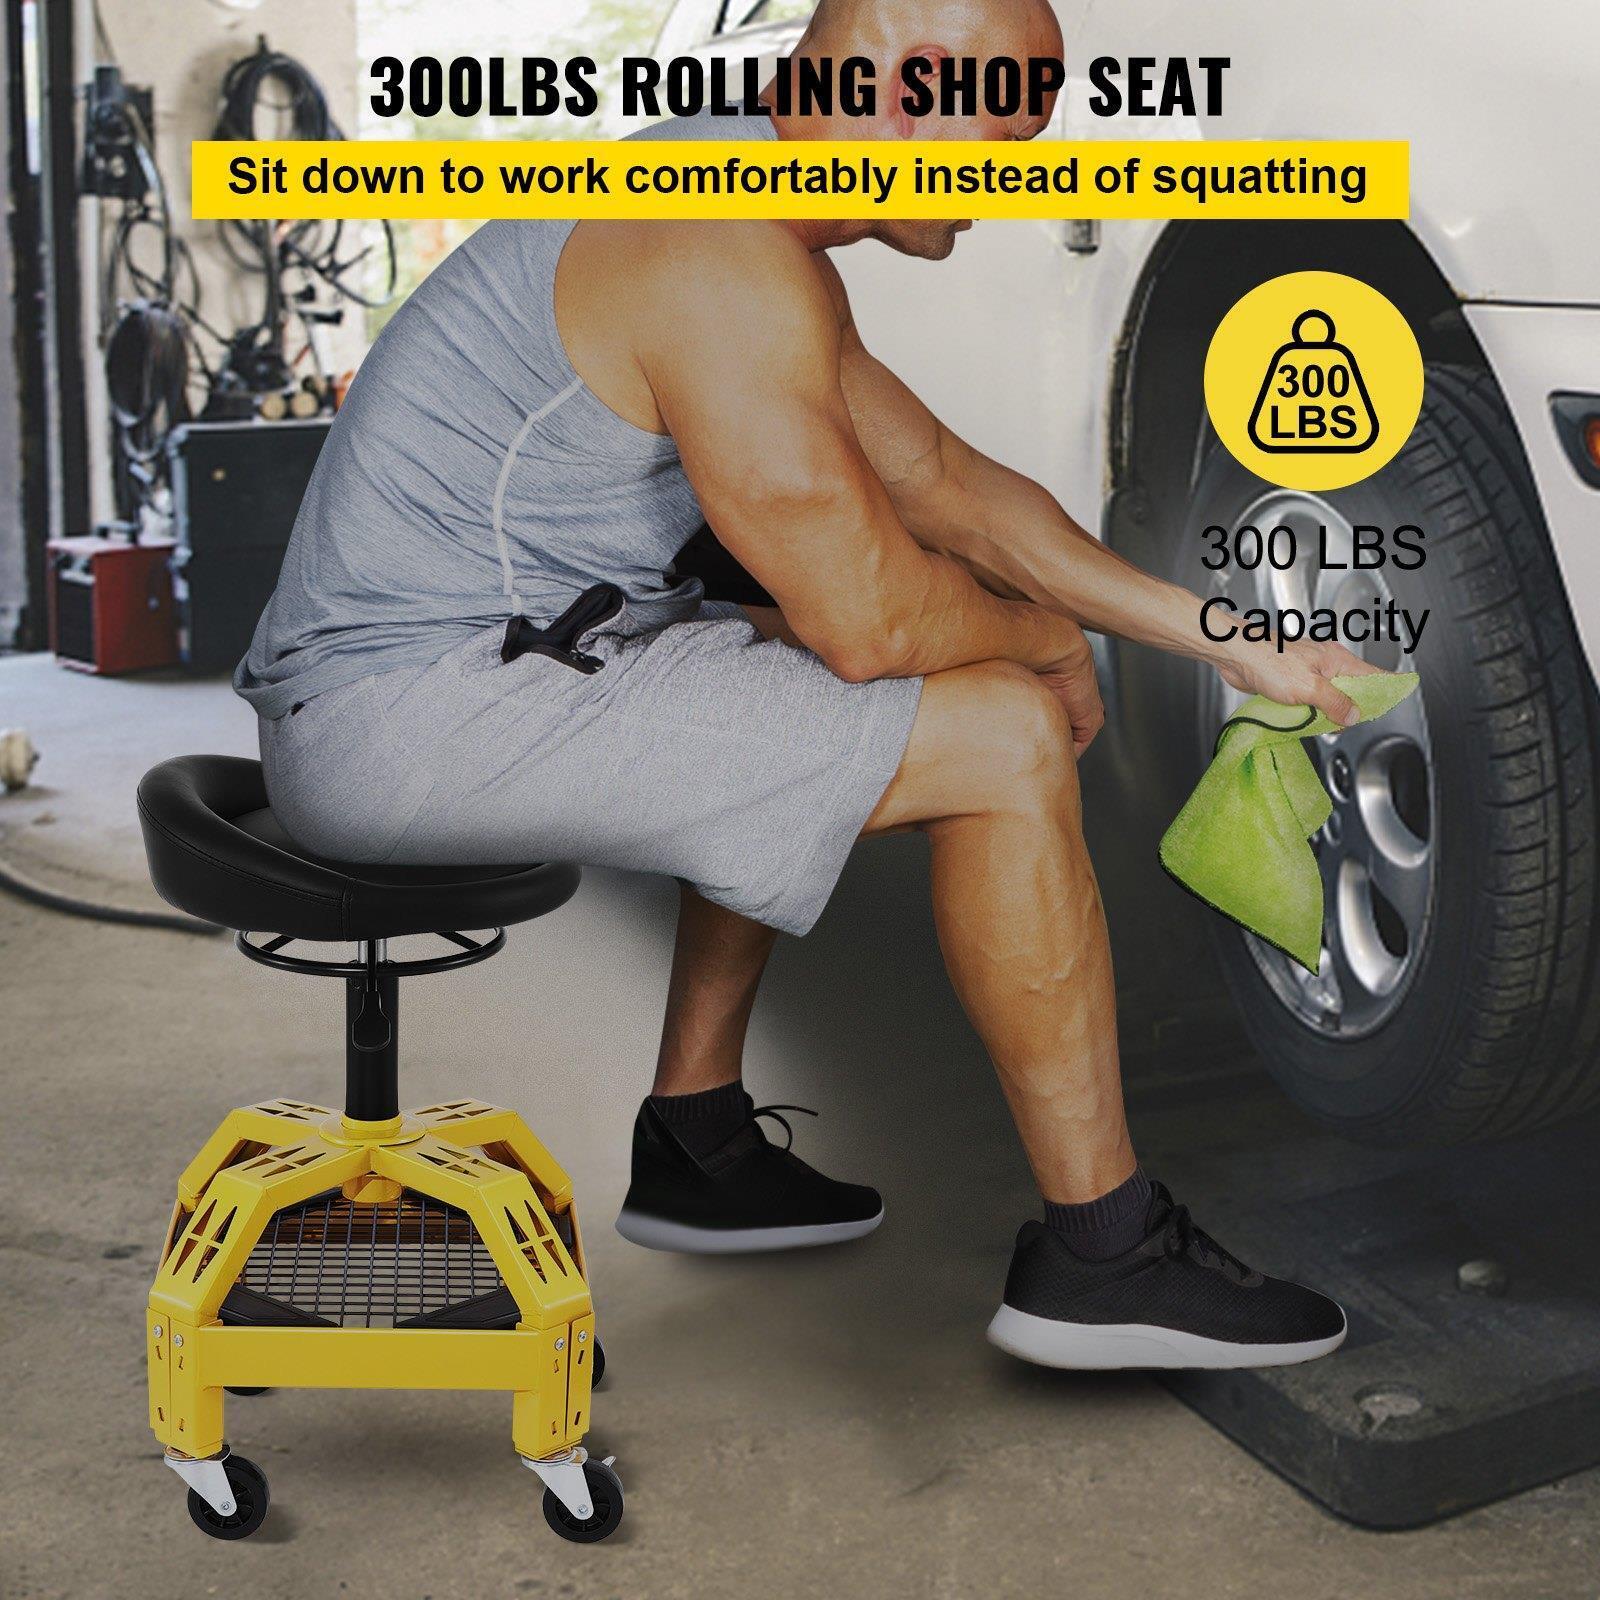 VEVOR Rolling Garage Stool, 300LBS Capacity, Adjustable Height from 24 in to 28.